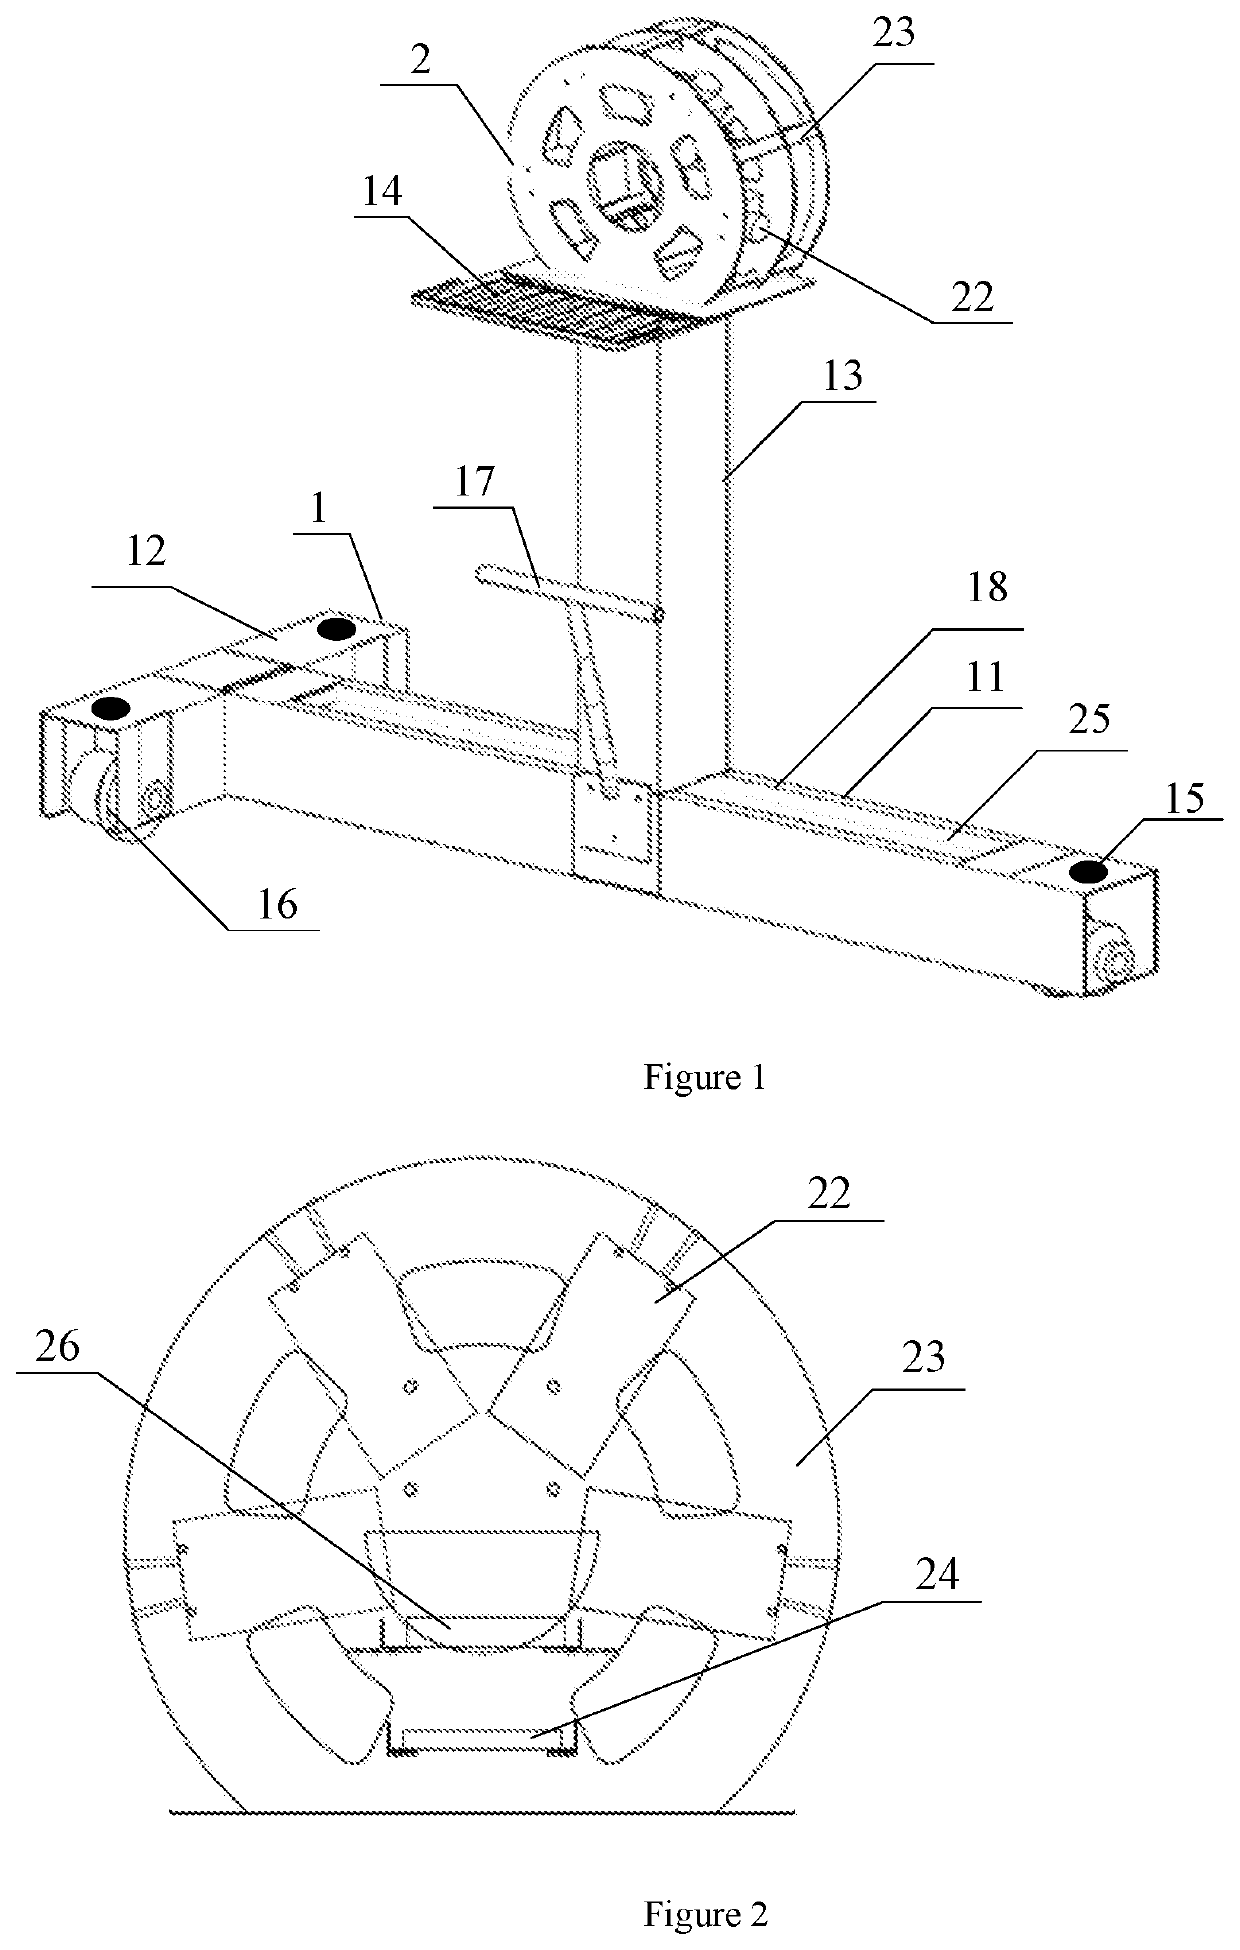 System for quickly detecting tunnel deformation